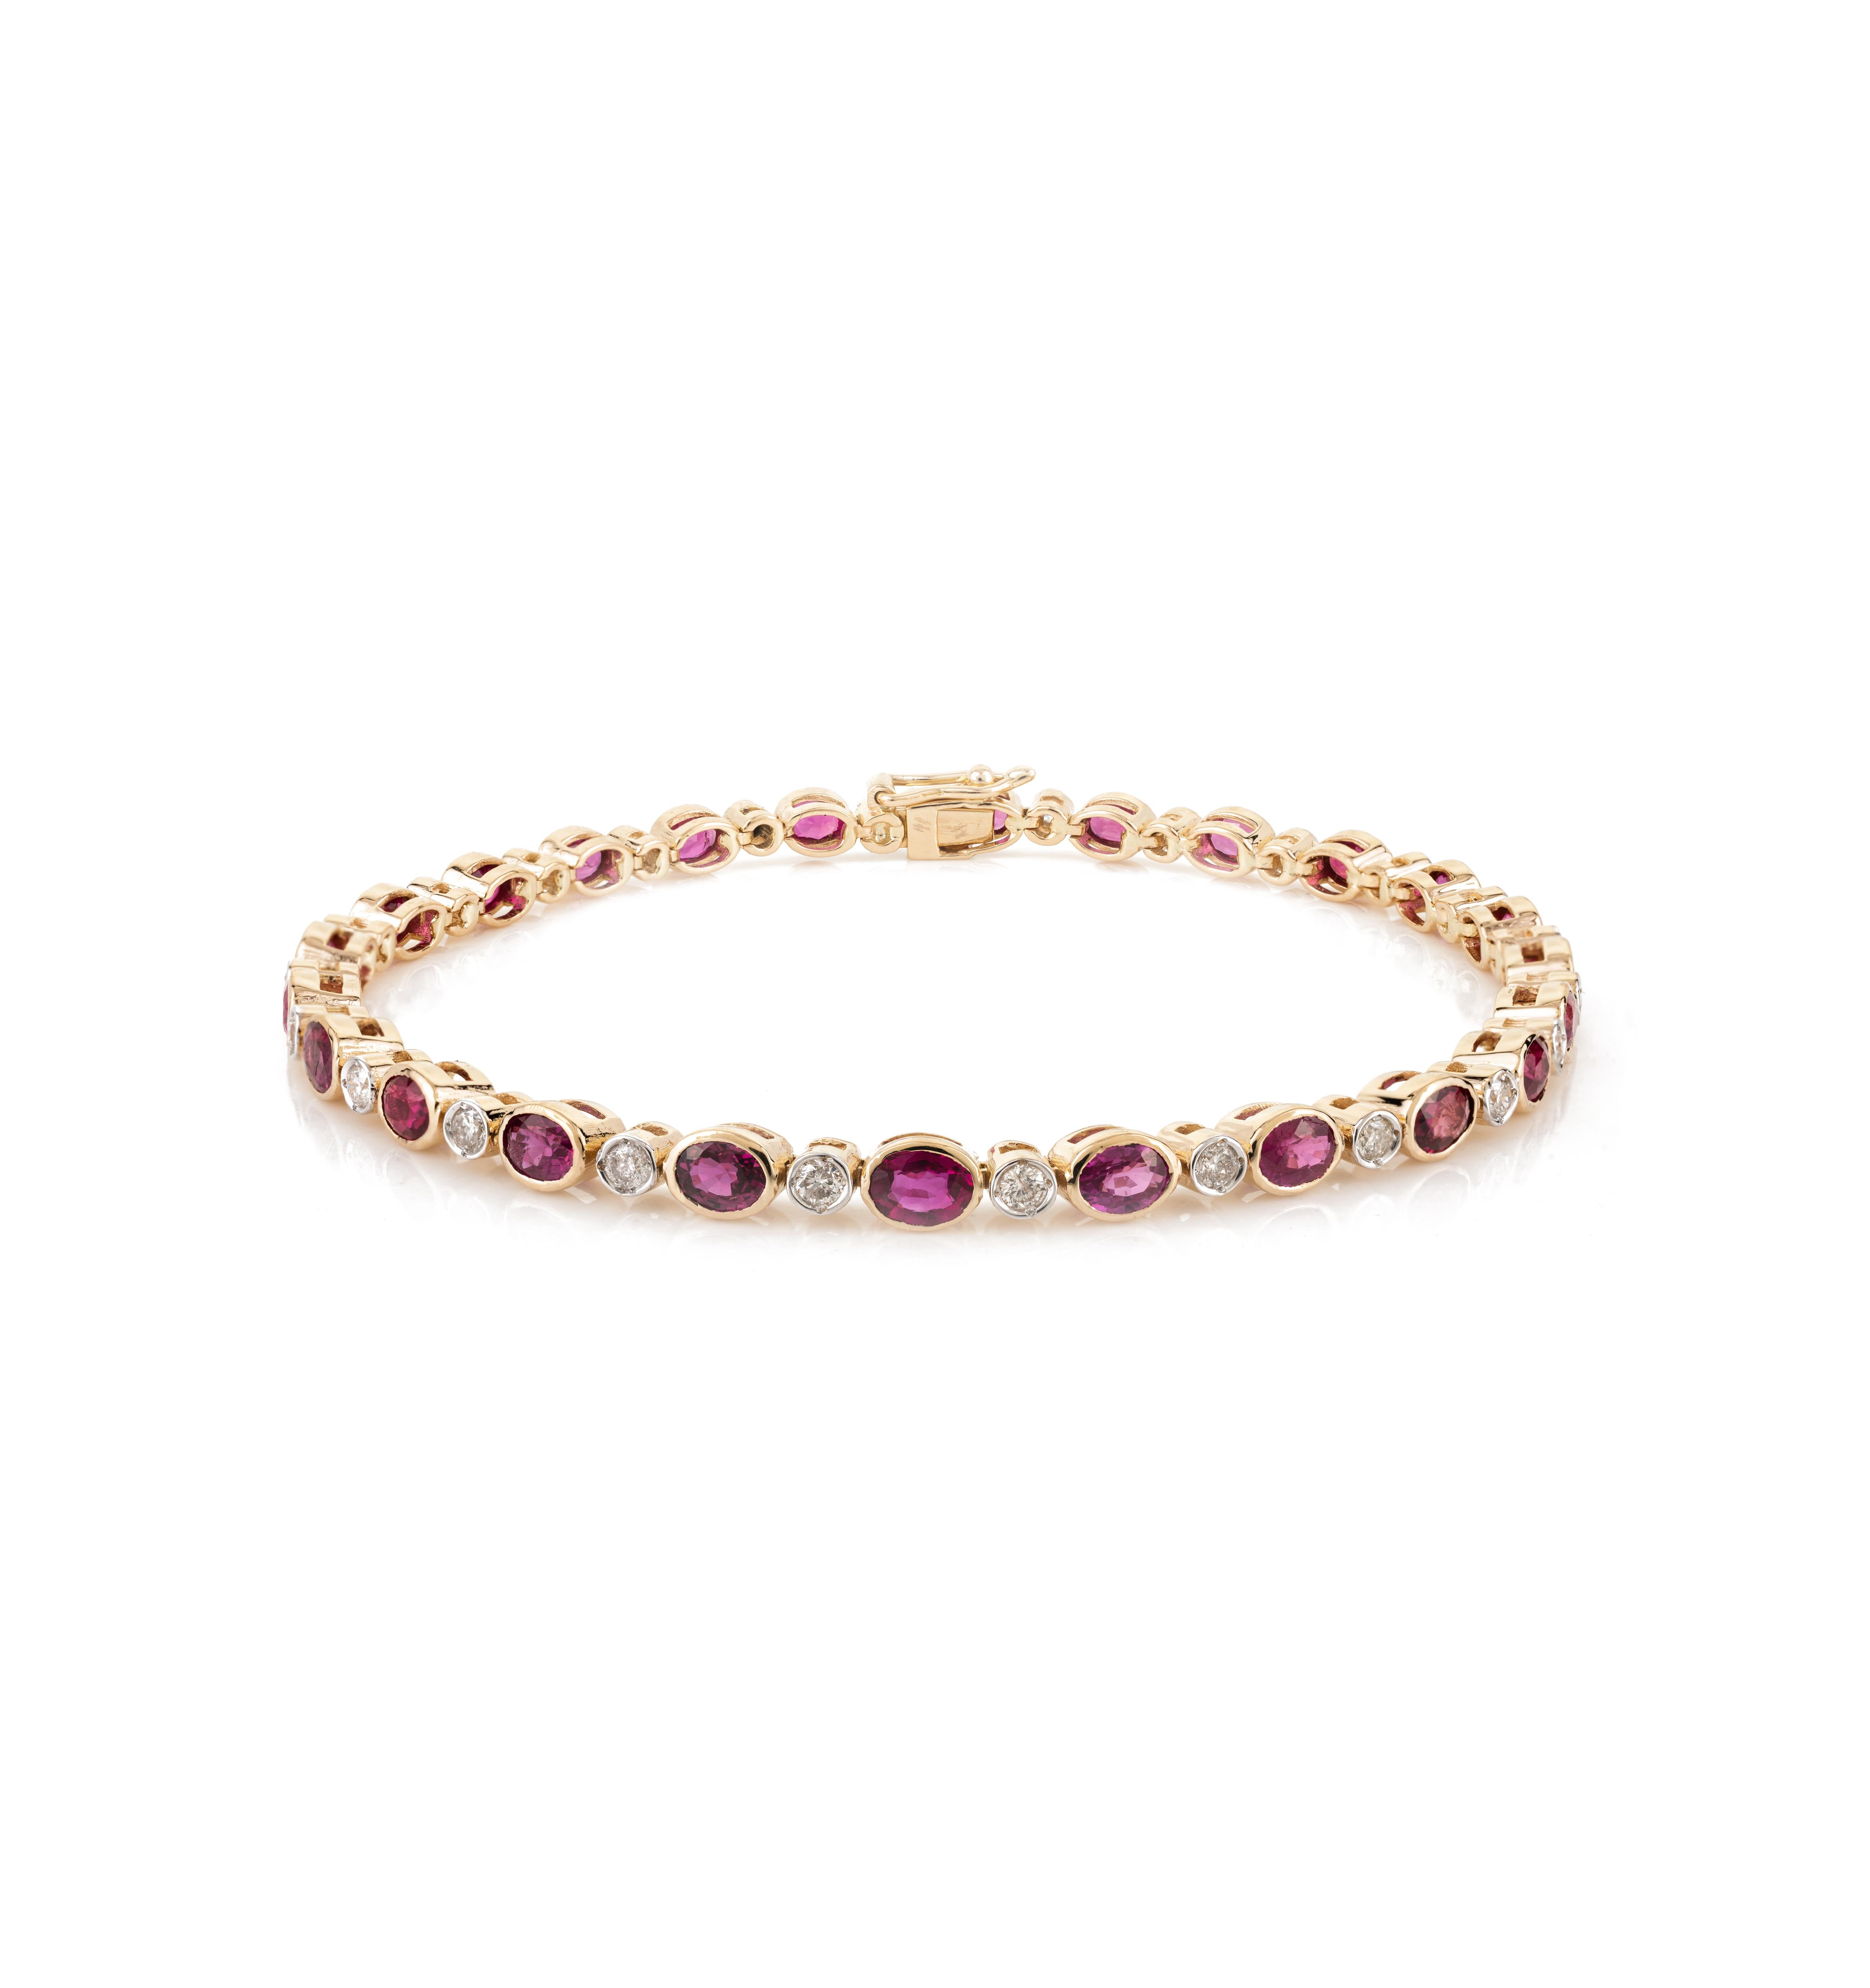 4.9 Carat Faceted Ruby Diamond Tennis Bracelet in 18k Solid Yellow Gold In New Condition For Sale In Houston, TX